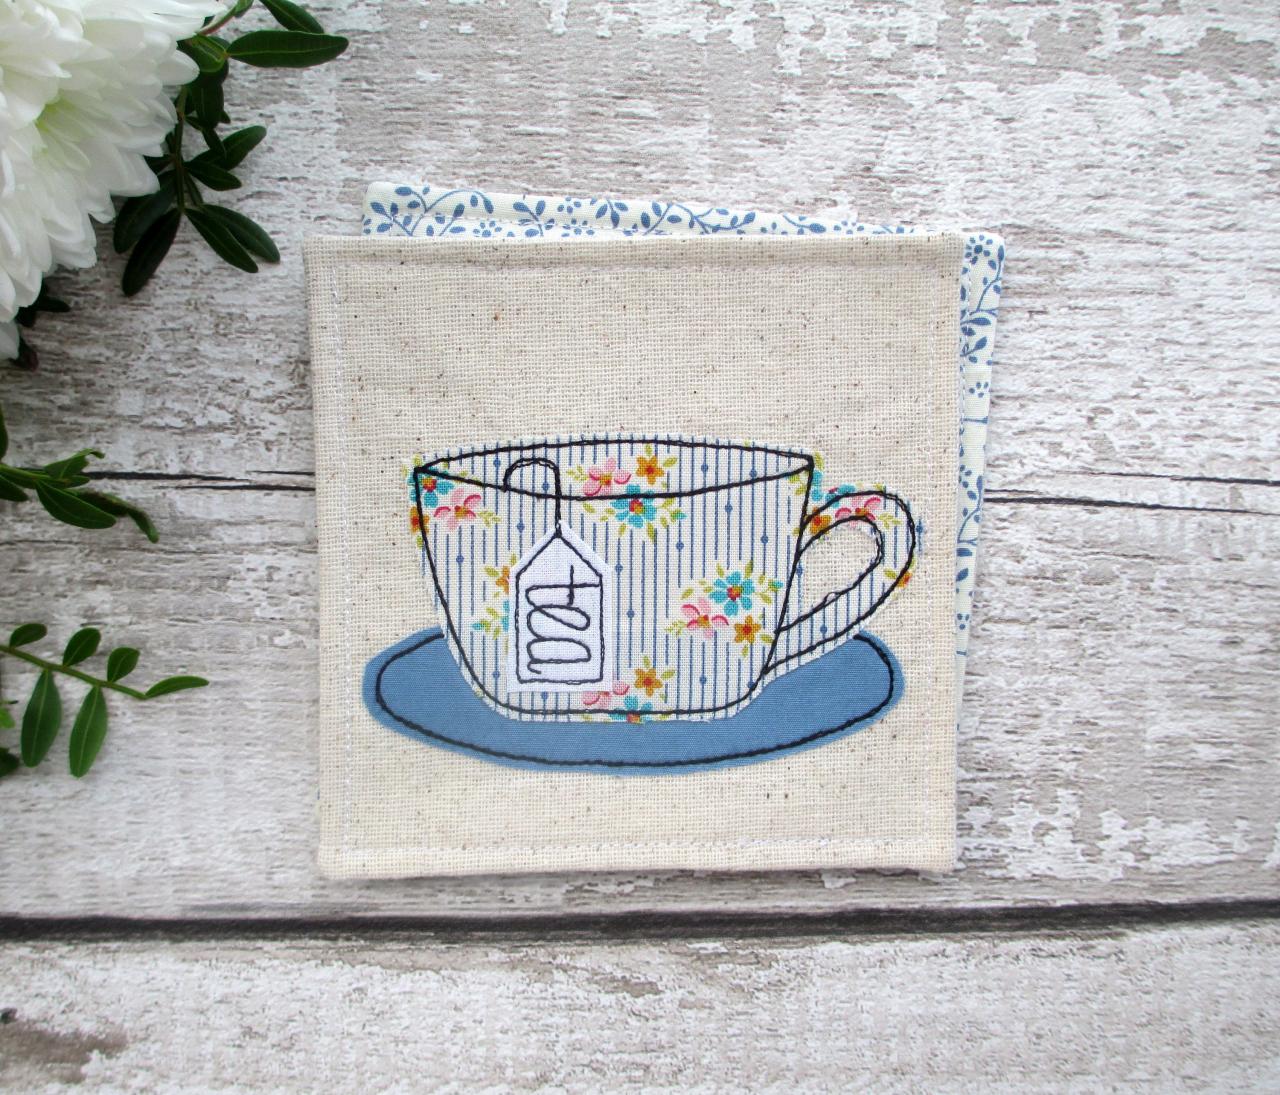 Fabric Coaster, Housewarming Gift For A Tea Lover, Tea Party Decor, Party Favours, Small Gift Ideas, Unique Tea Gift